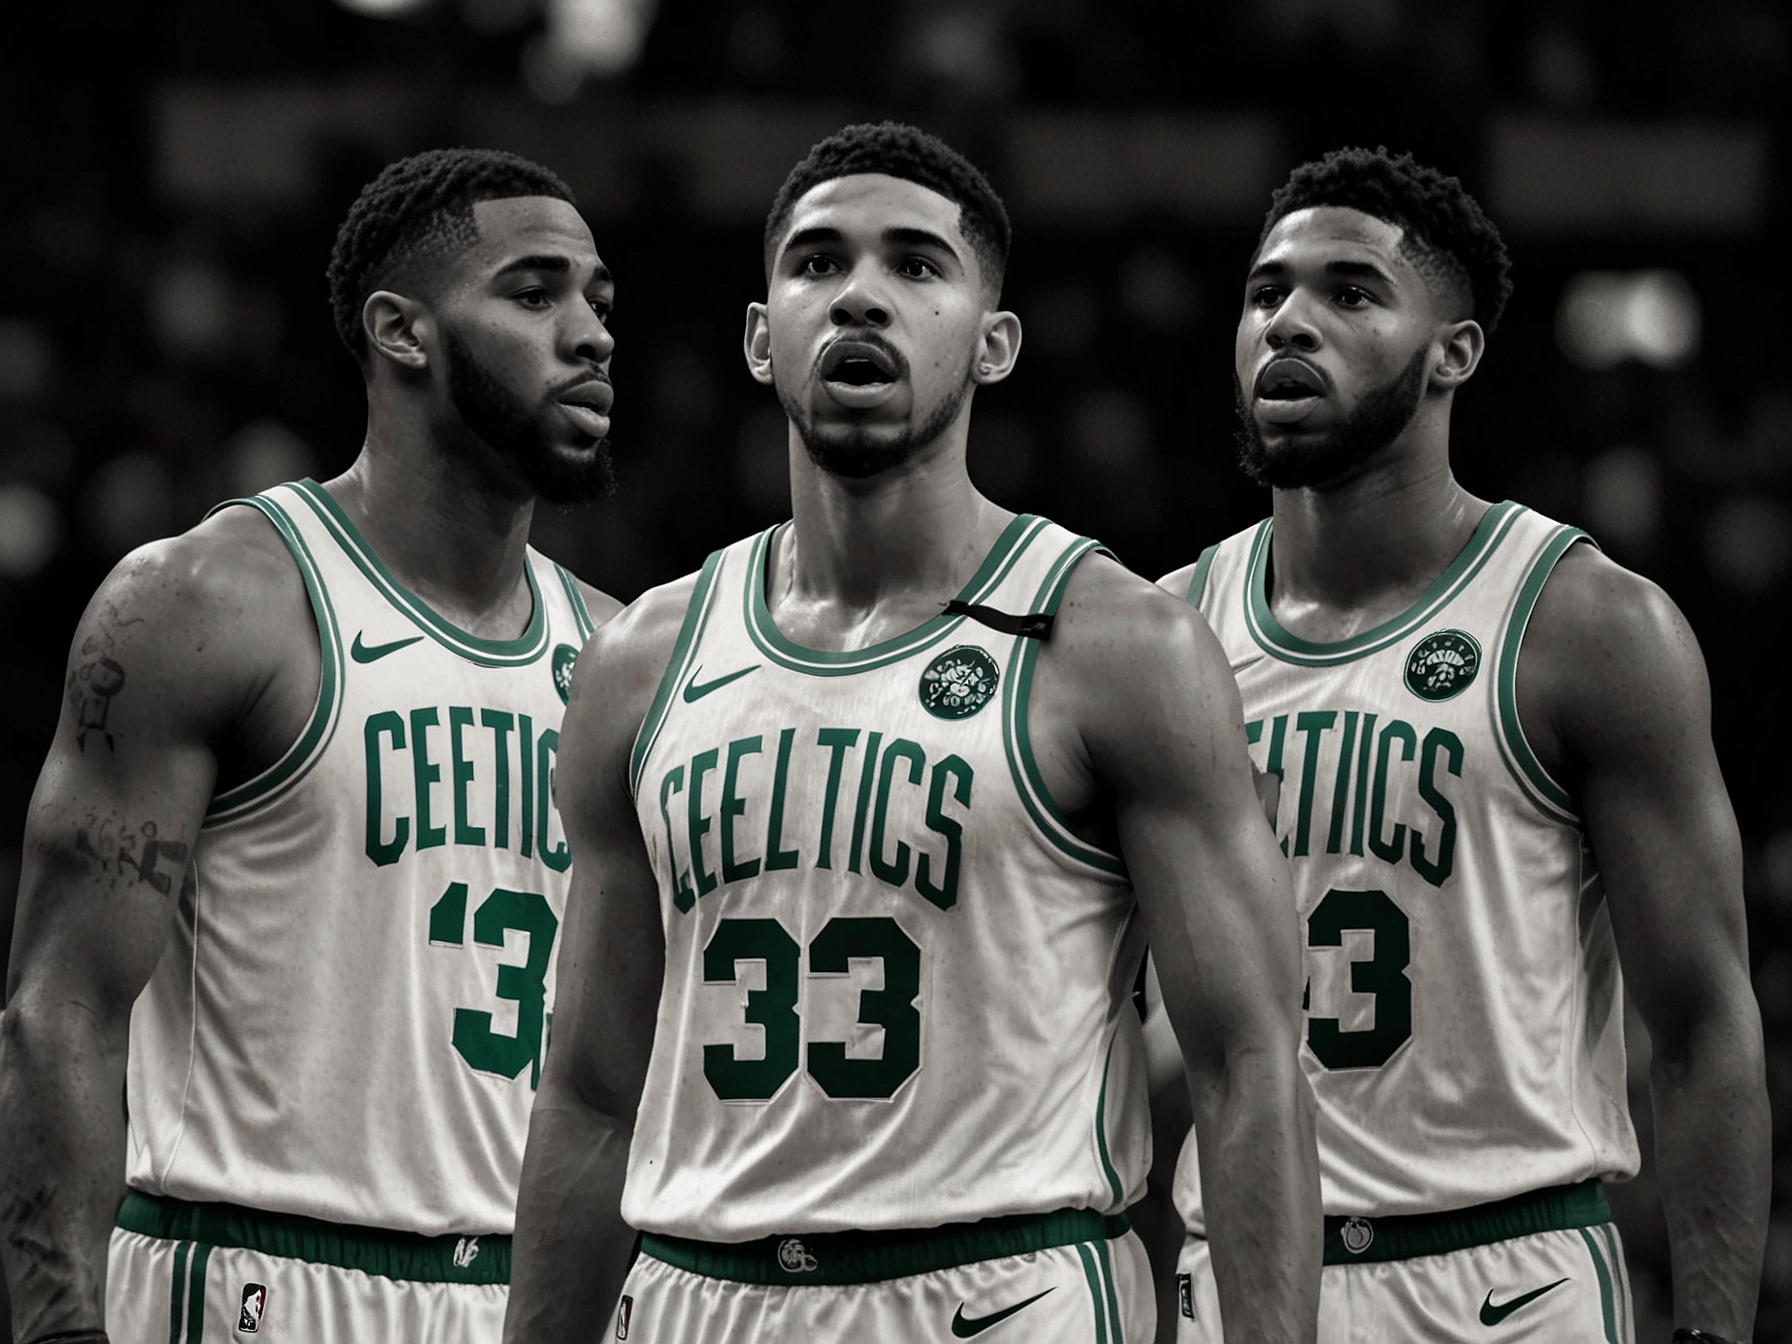 Jayson Tatum, Jaylen Brown, and Marcus Smart displaying their resilience and skill on the court, driving the Celtics toward a potential historic win against the Mavericks.